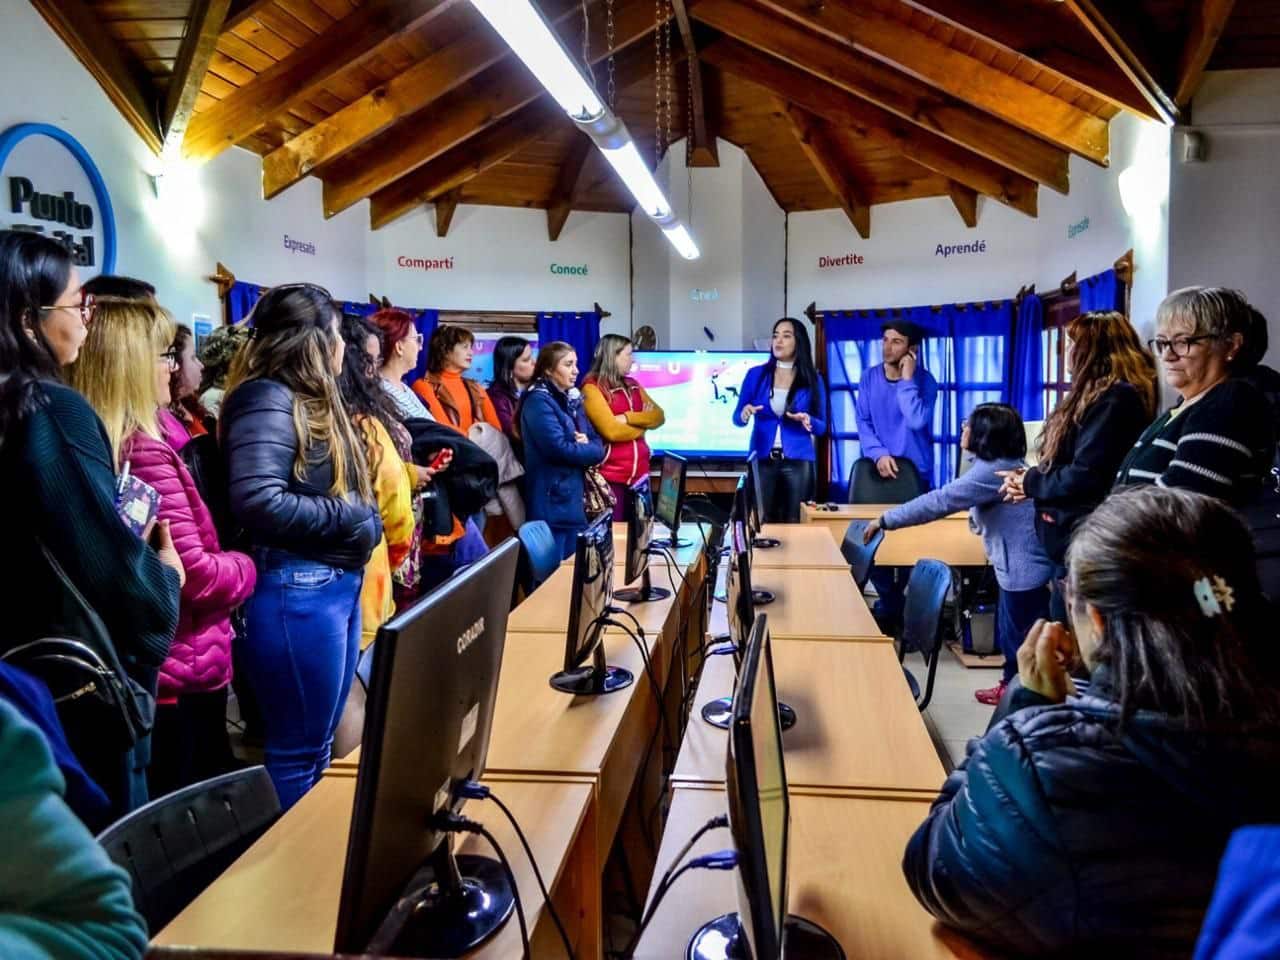 The municipality opened the “Ushuaia Emprende” space.